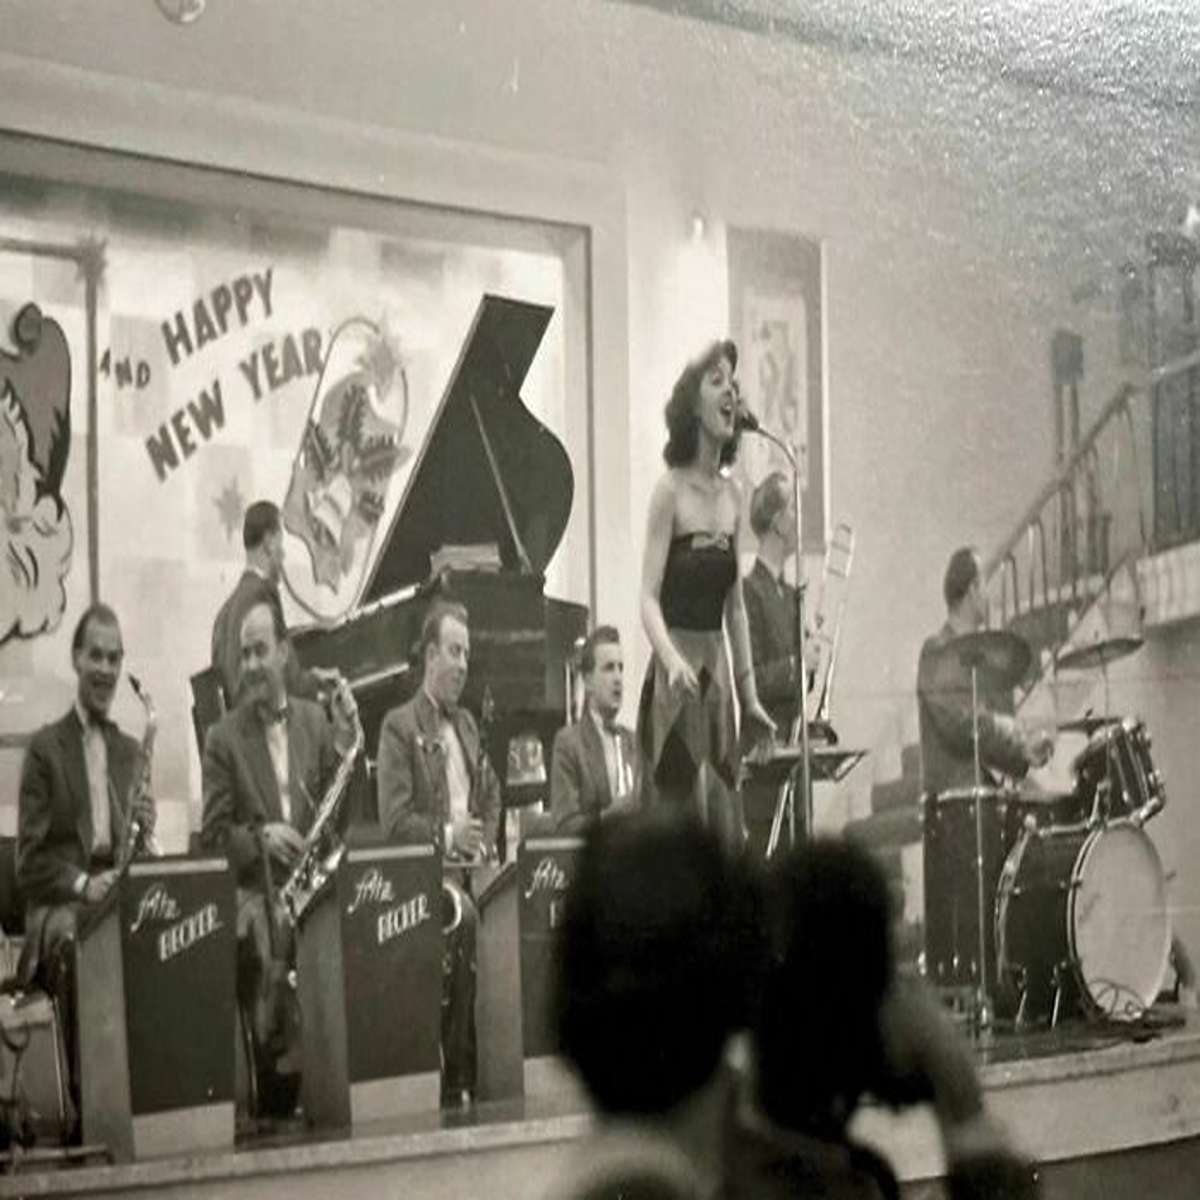 A Band Entertaining U.S. Servicemen In Europe On New Year's Eve, Early 1950s